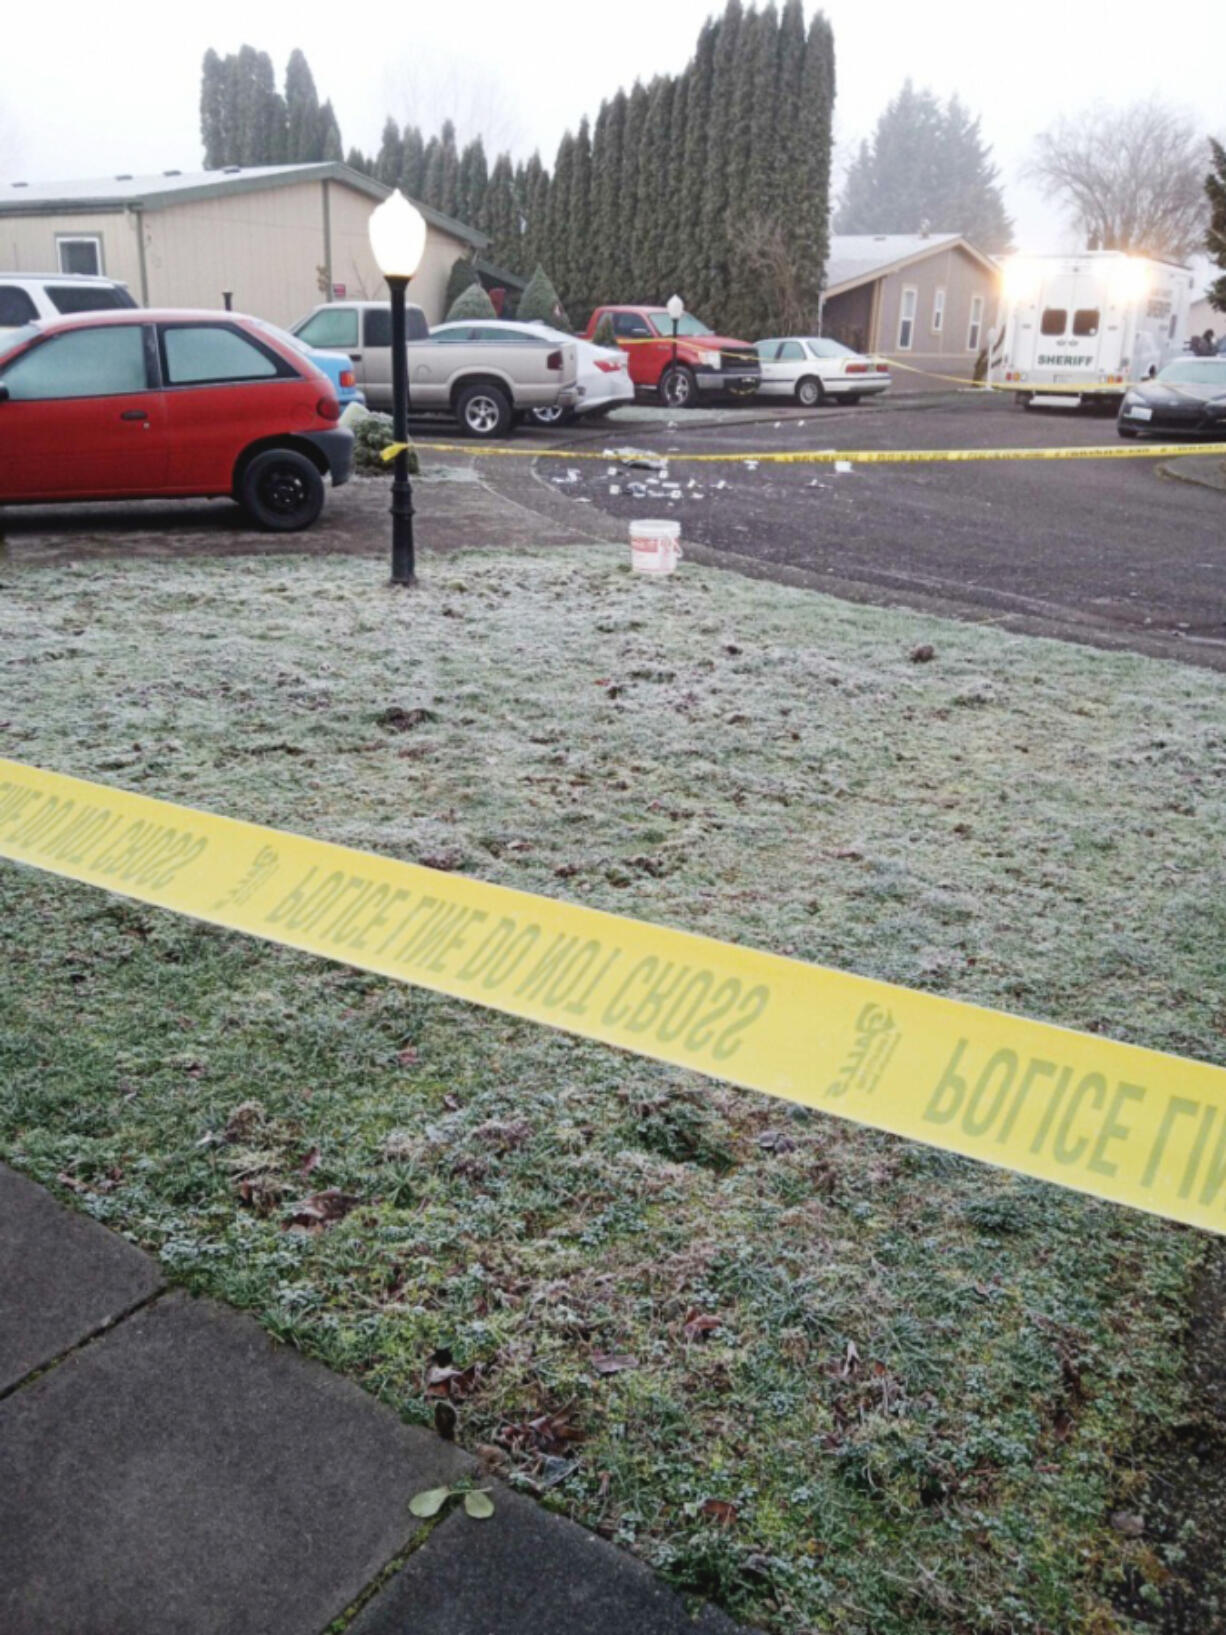 Police tape blocks off the area where Vancouver police officers fatally shot a man they say was armed with a knife Sunday morning. The shooting was at the Sky Ridge Estates mobile home park in Vancouver's North Image neighborhood.